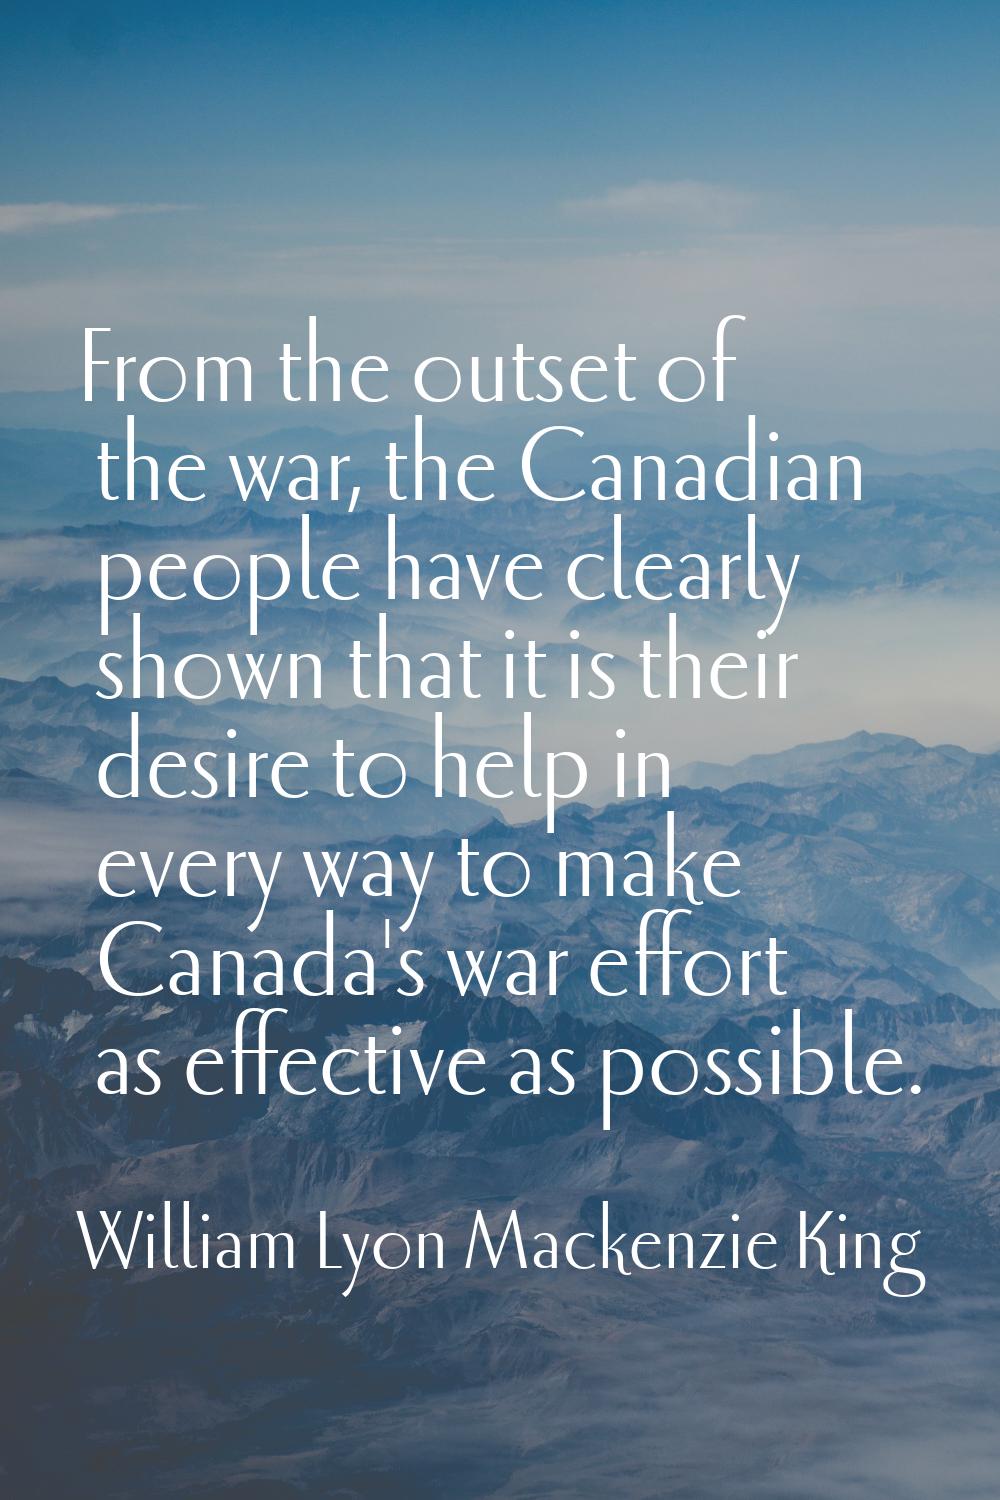 From the outset of the war, the Canadian people have clearly shown that it is their desire to help 